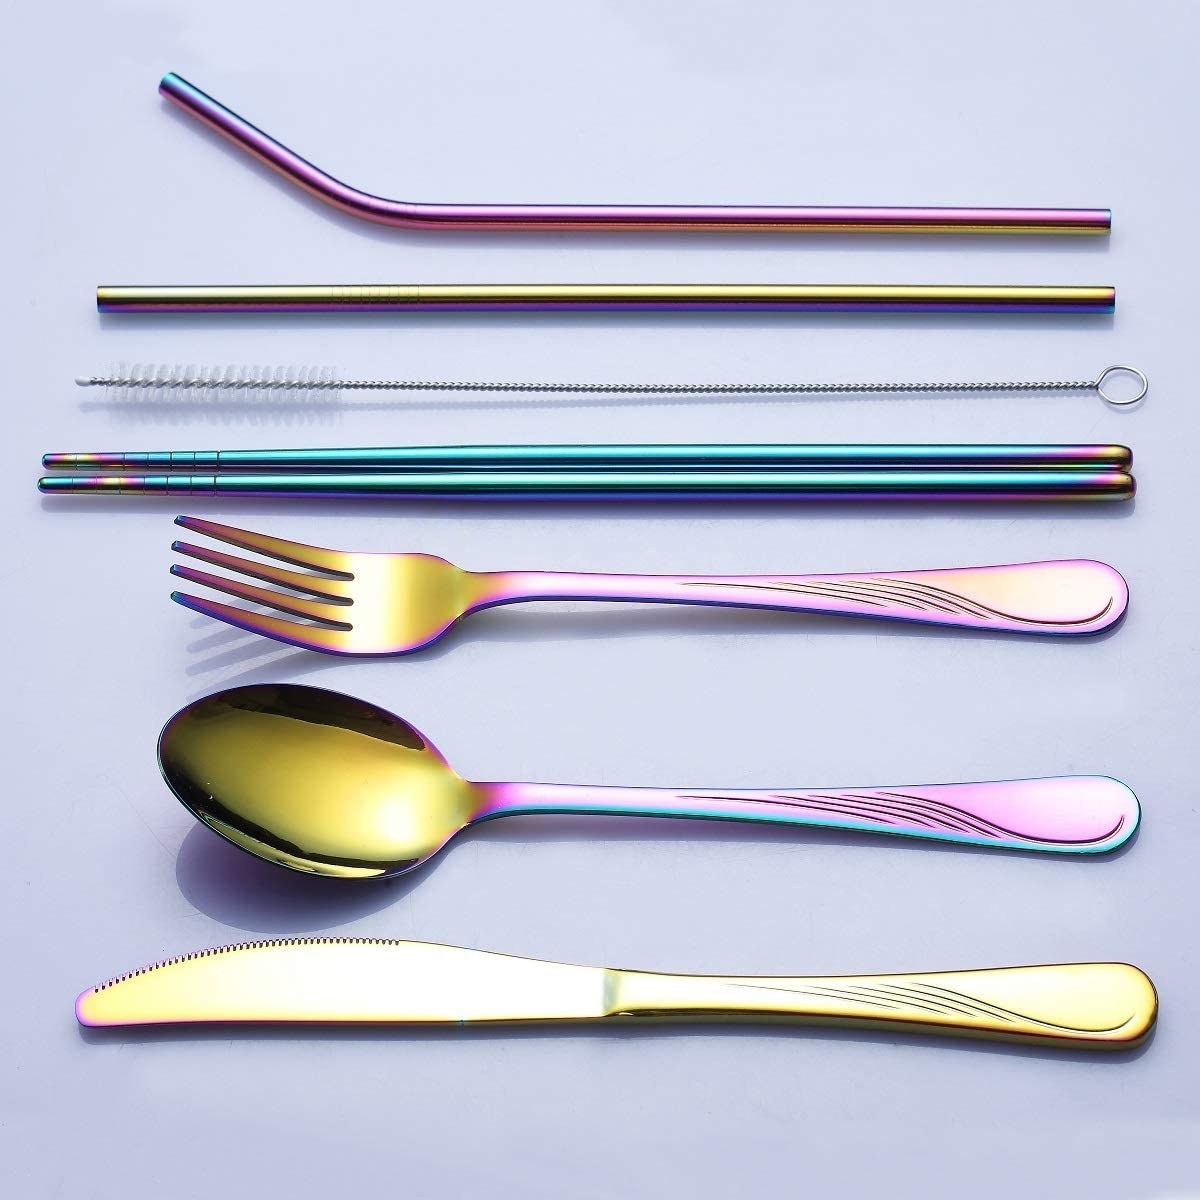 The set of flatware laid out on a table